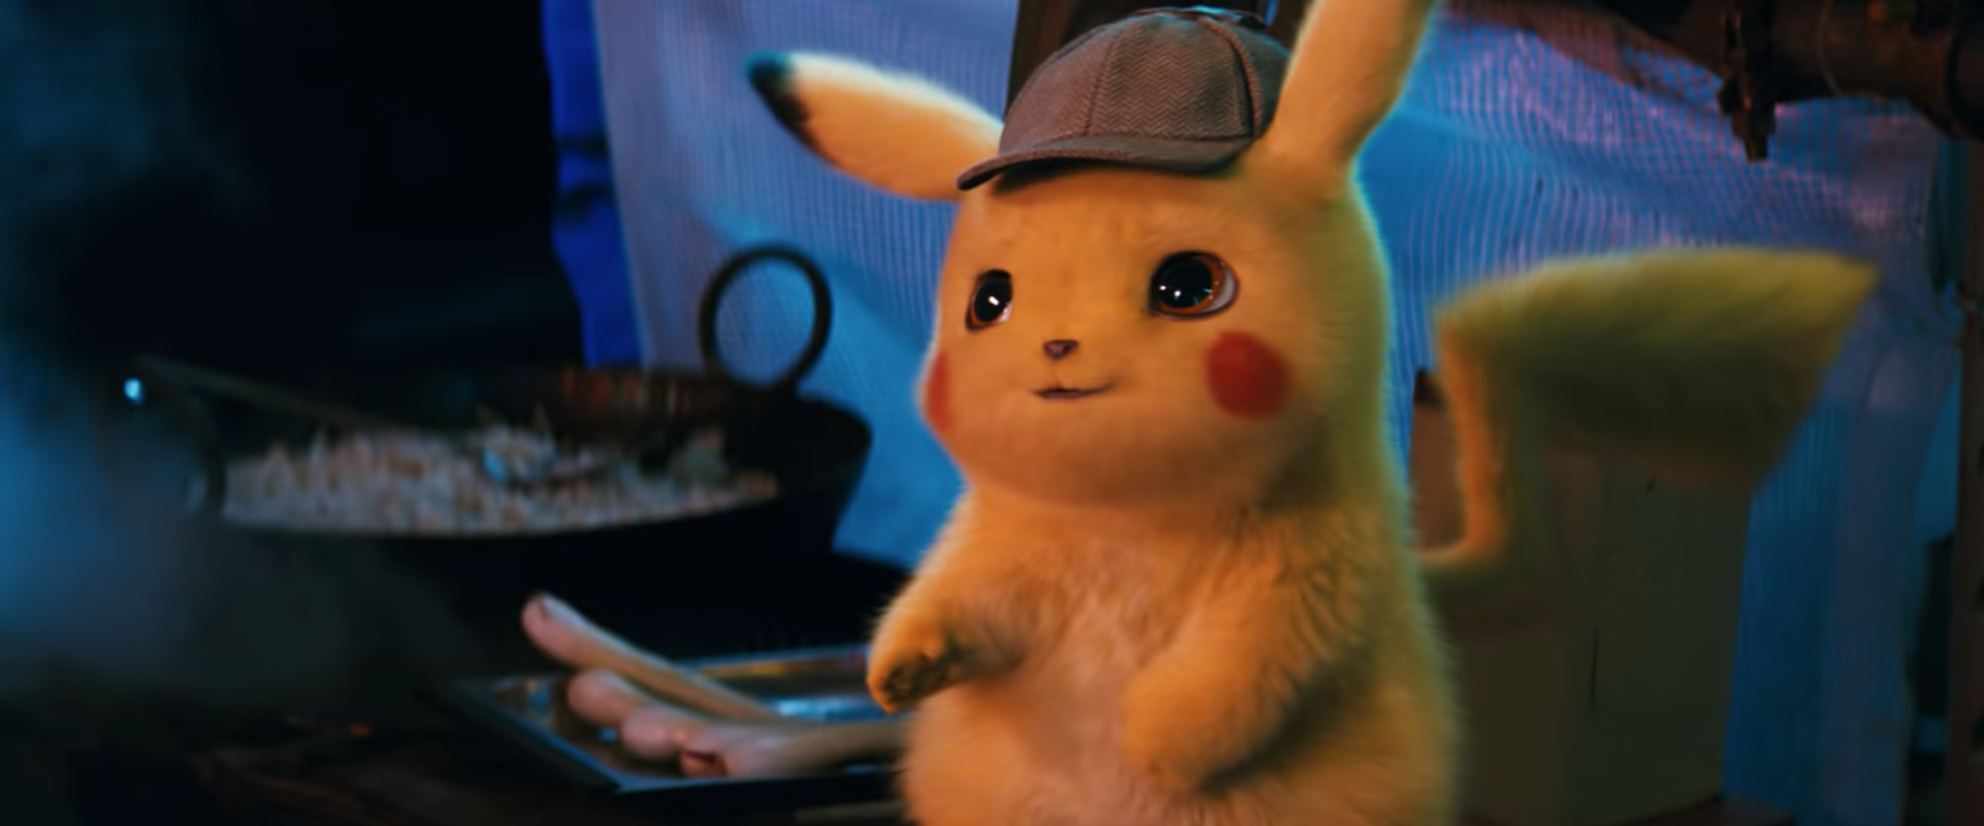 Ryan Reynolds is the titular character of Detective Pikachu